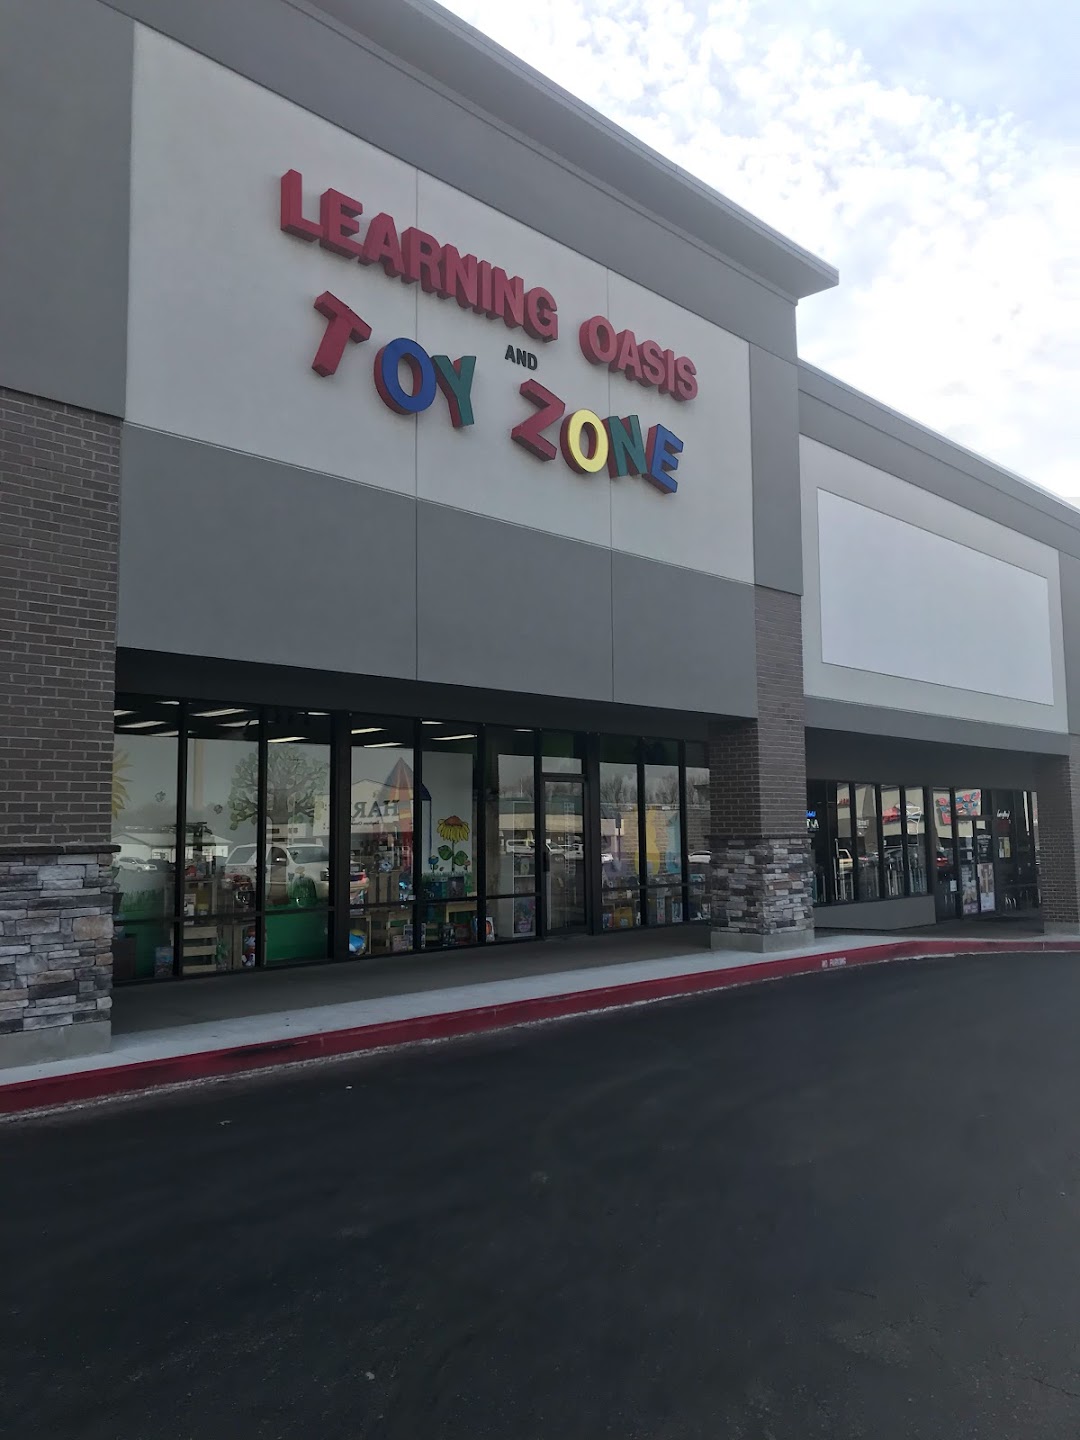 Learning Oasis and Toy Zone